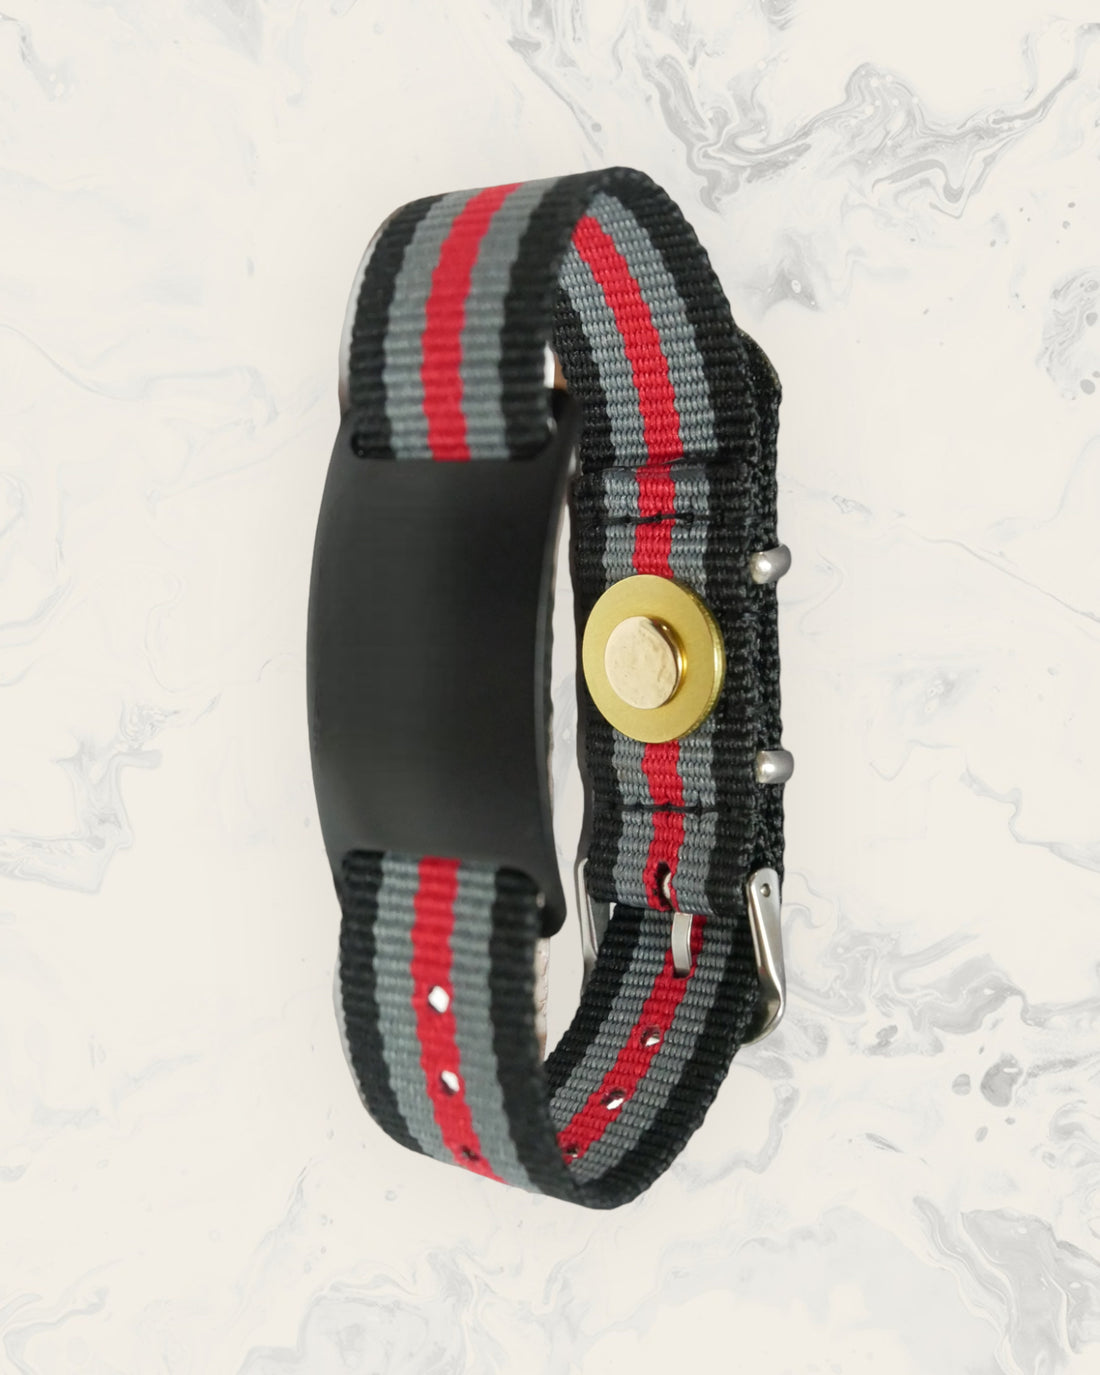 Natural Pain Relief and EMF Protection Bracelet Nylon Band Color Black, Gray, and Red Striped with a Black Slider